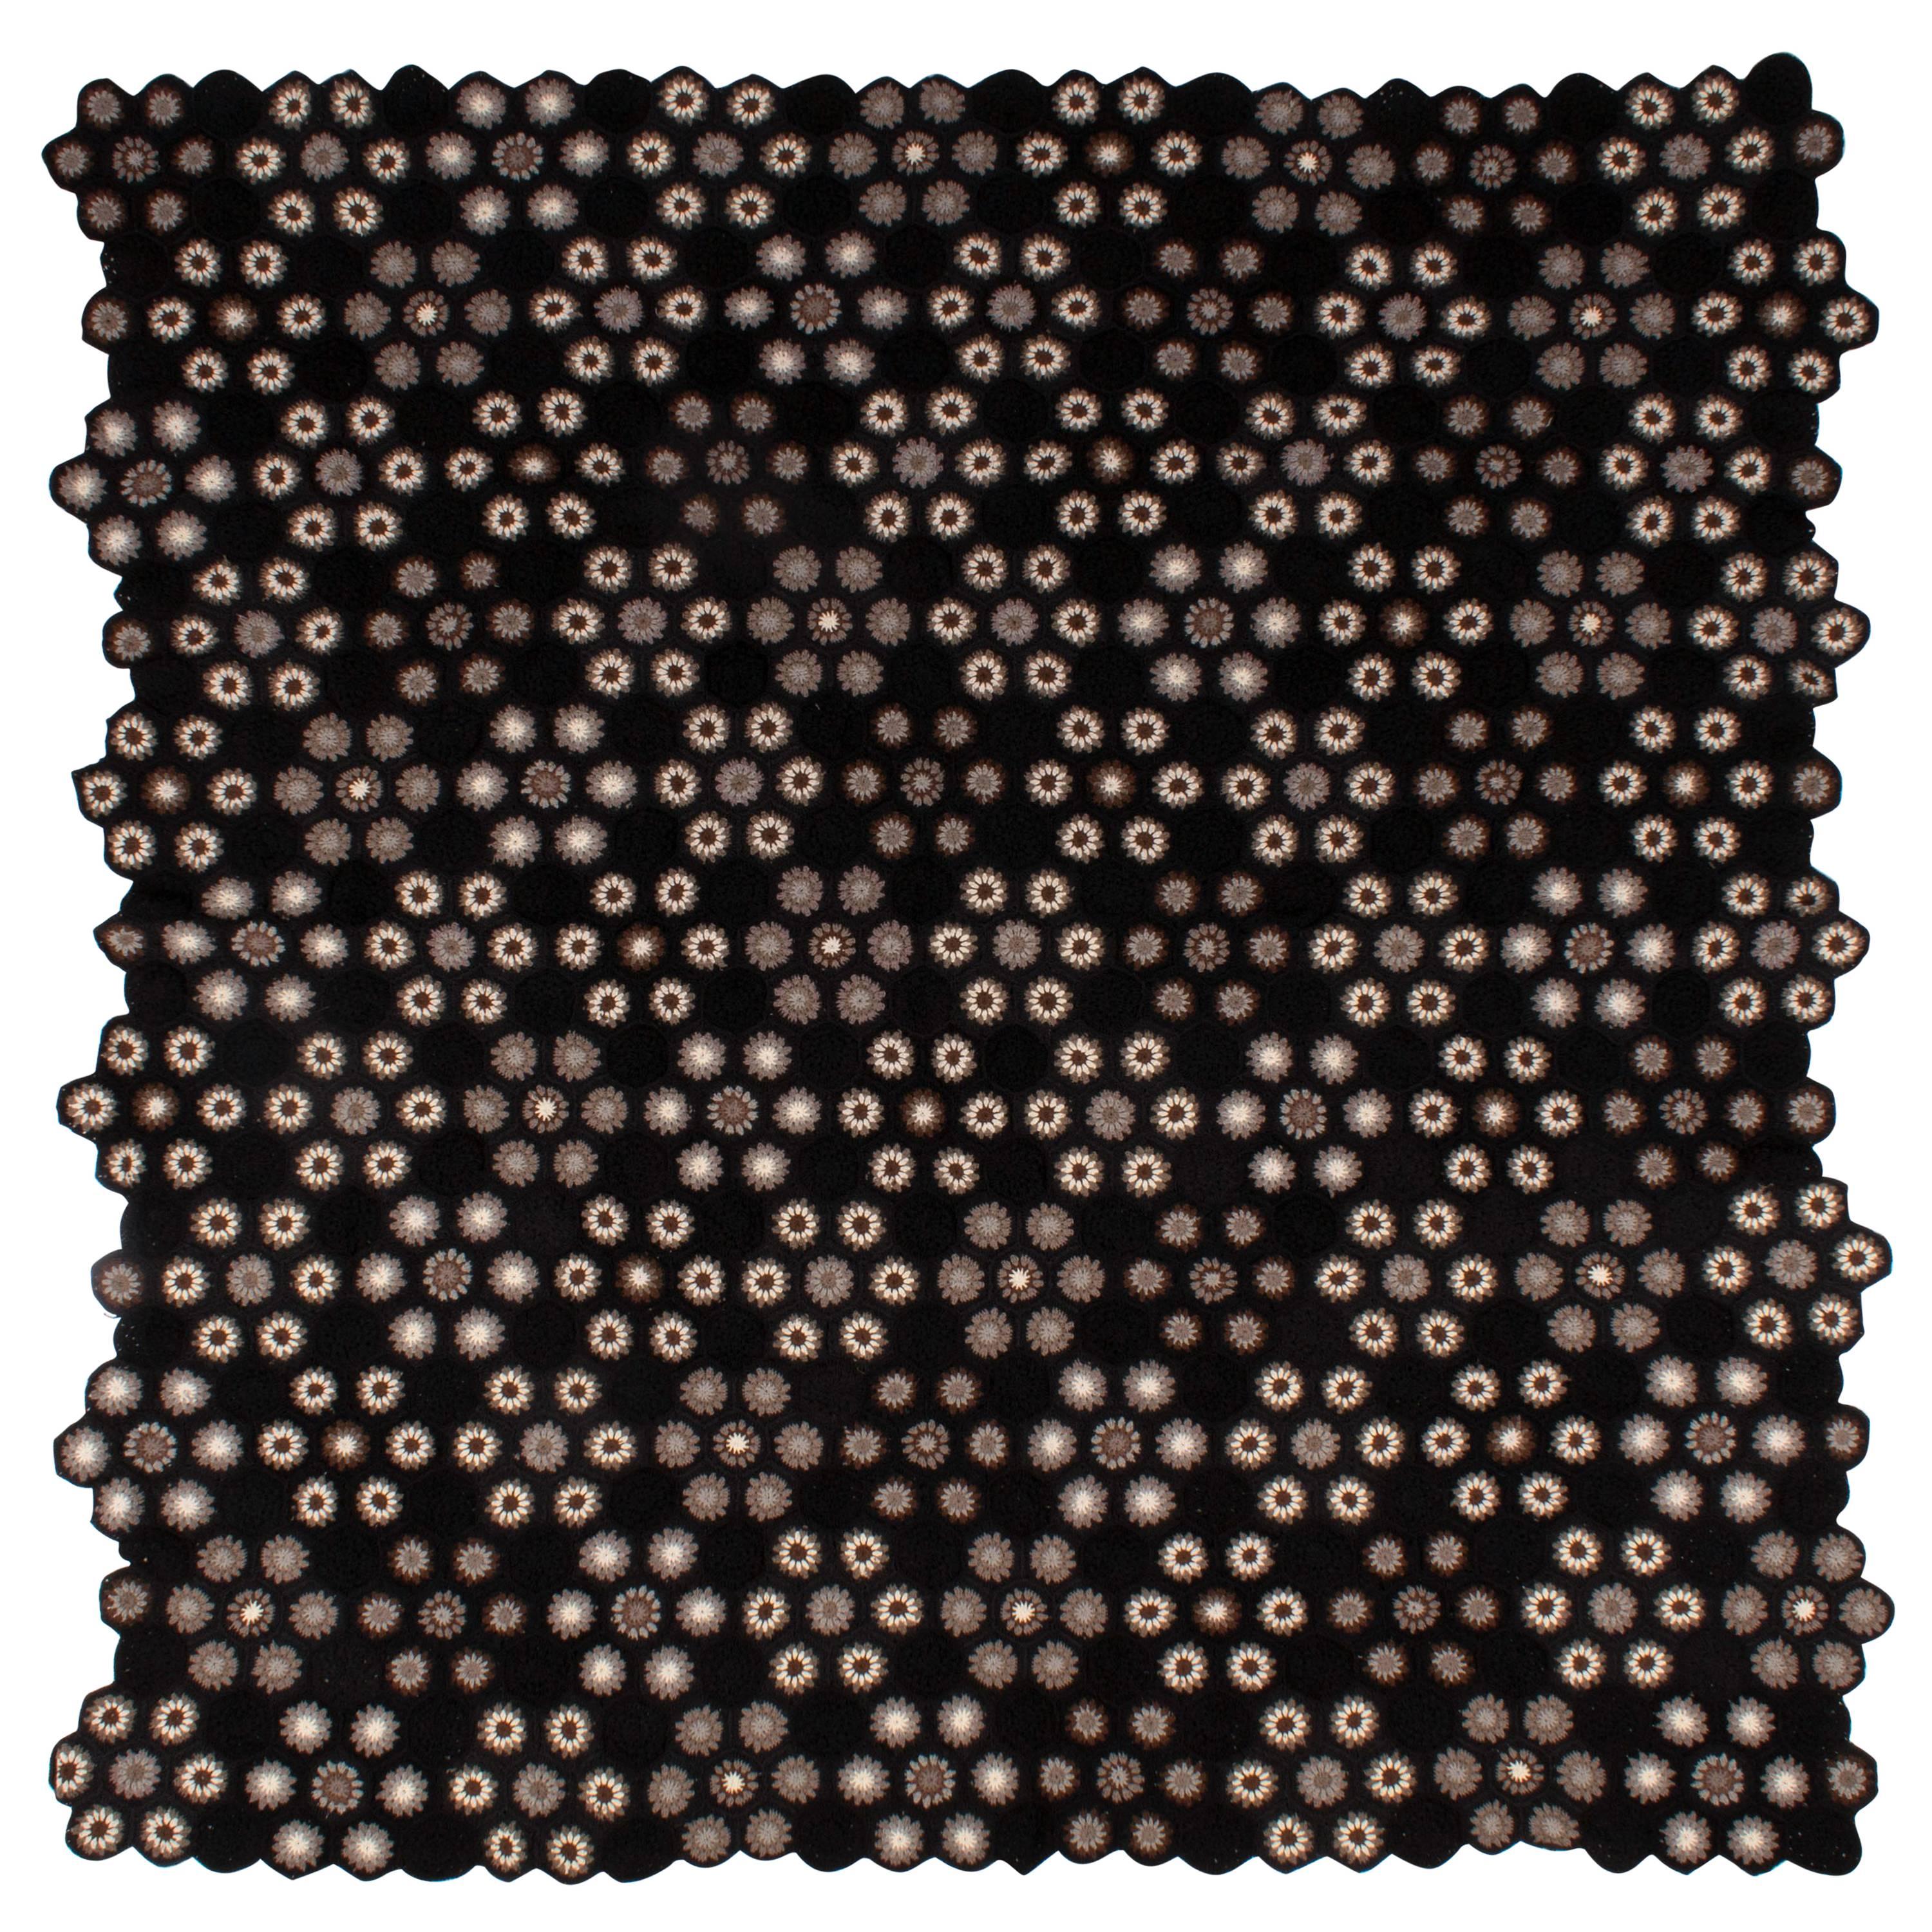 Art Deco Style Crocheted Medallion Blanket Throw 07 Black and Neutral Tones  For Sale